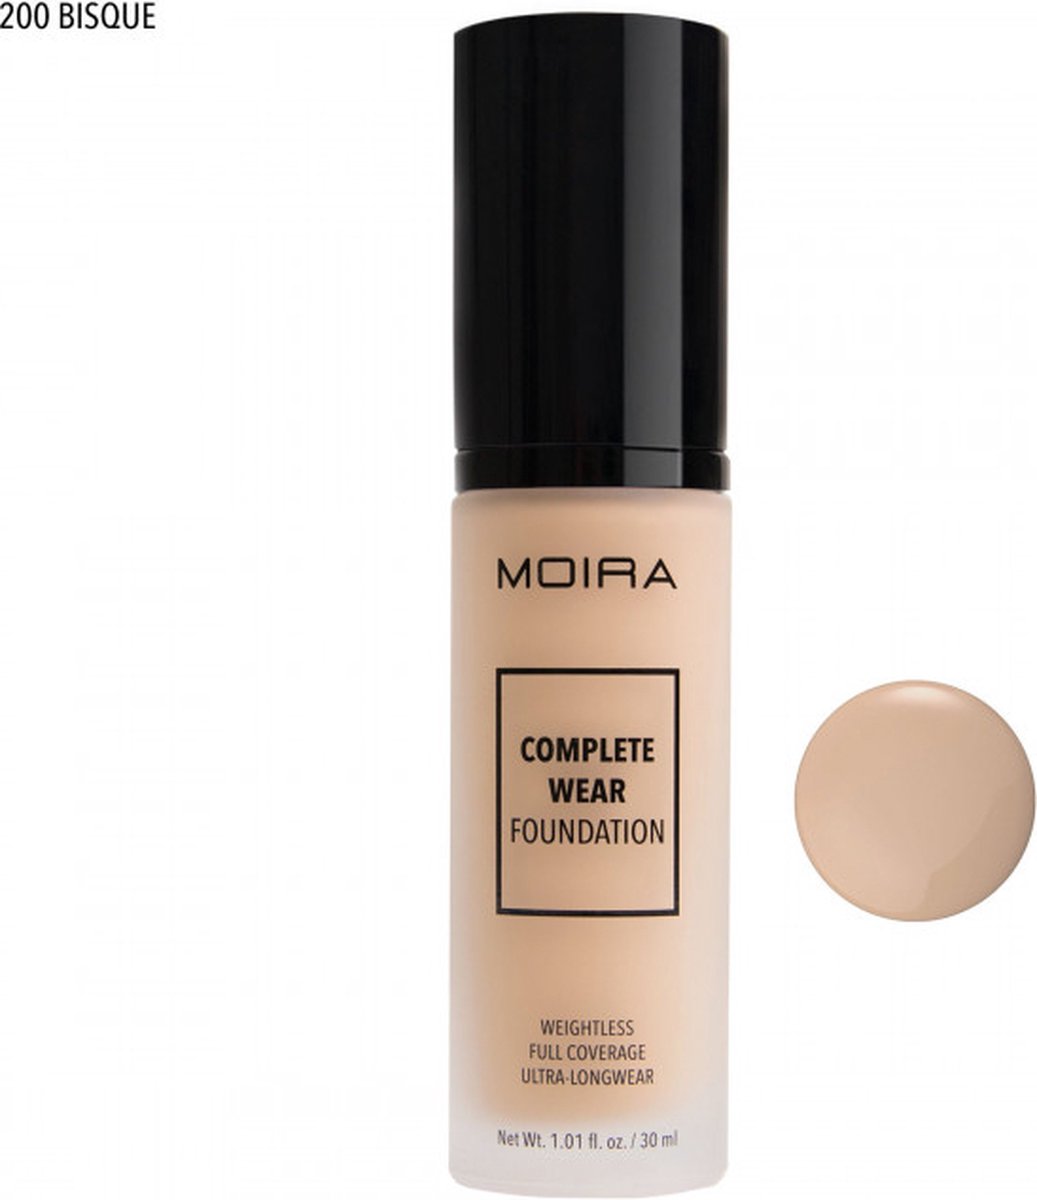 Moira COMPLETE WEAR FOUNDATION 200 BISQUE